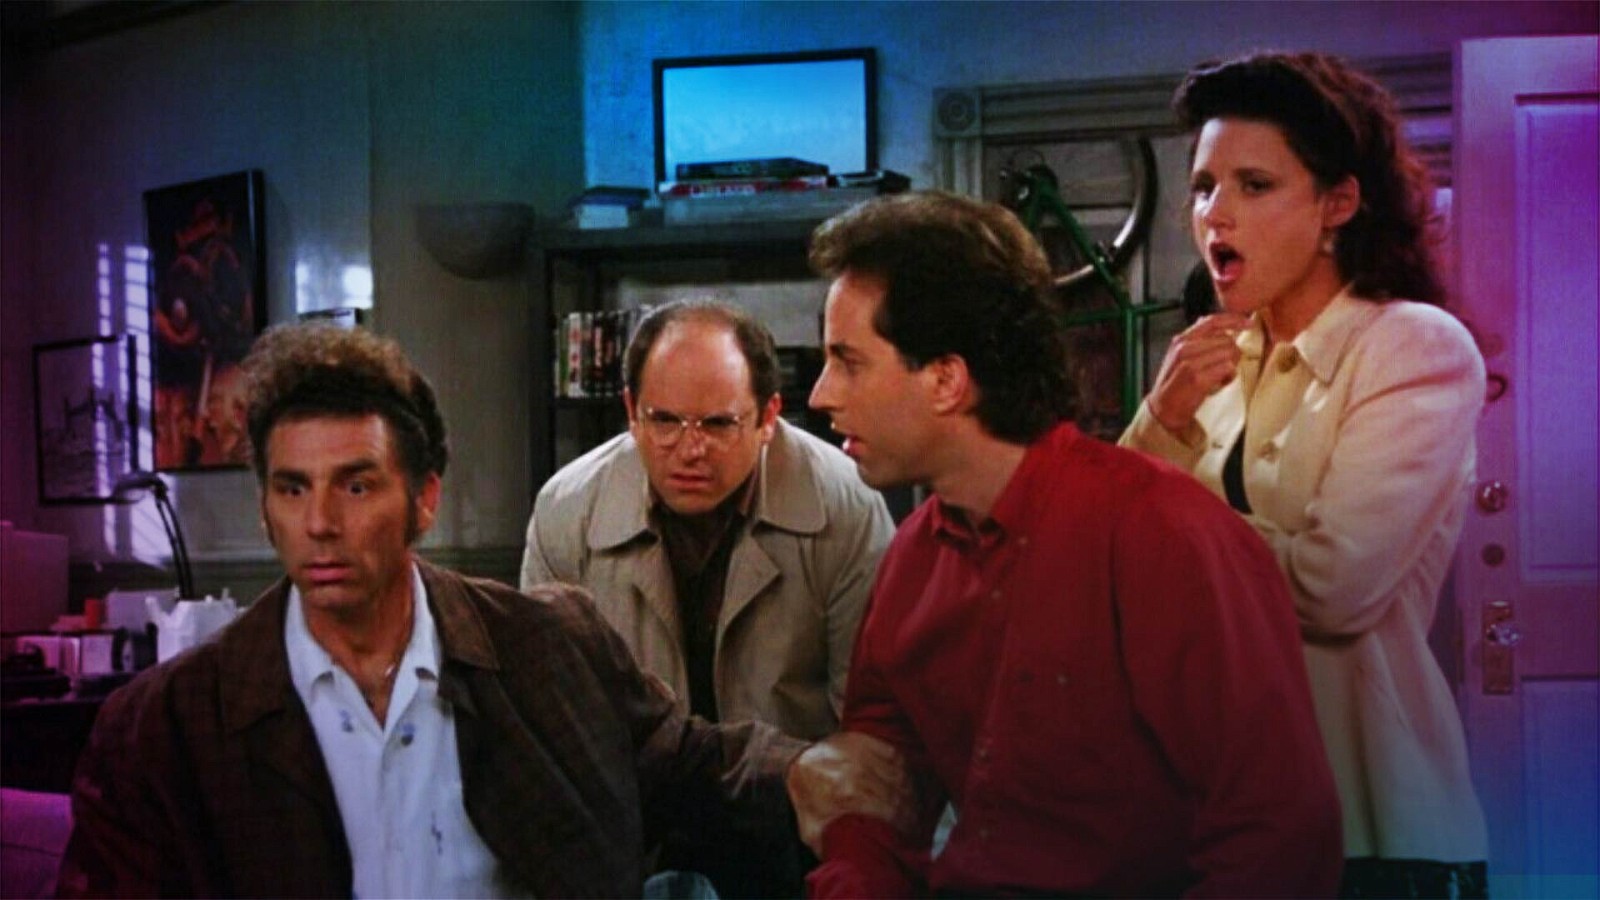 Cosmo, Jerry and Elaine having a funny conversation